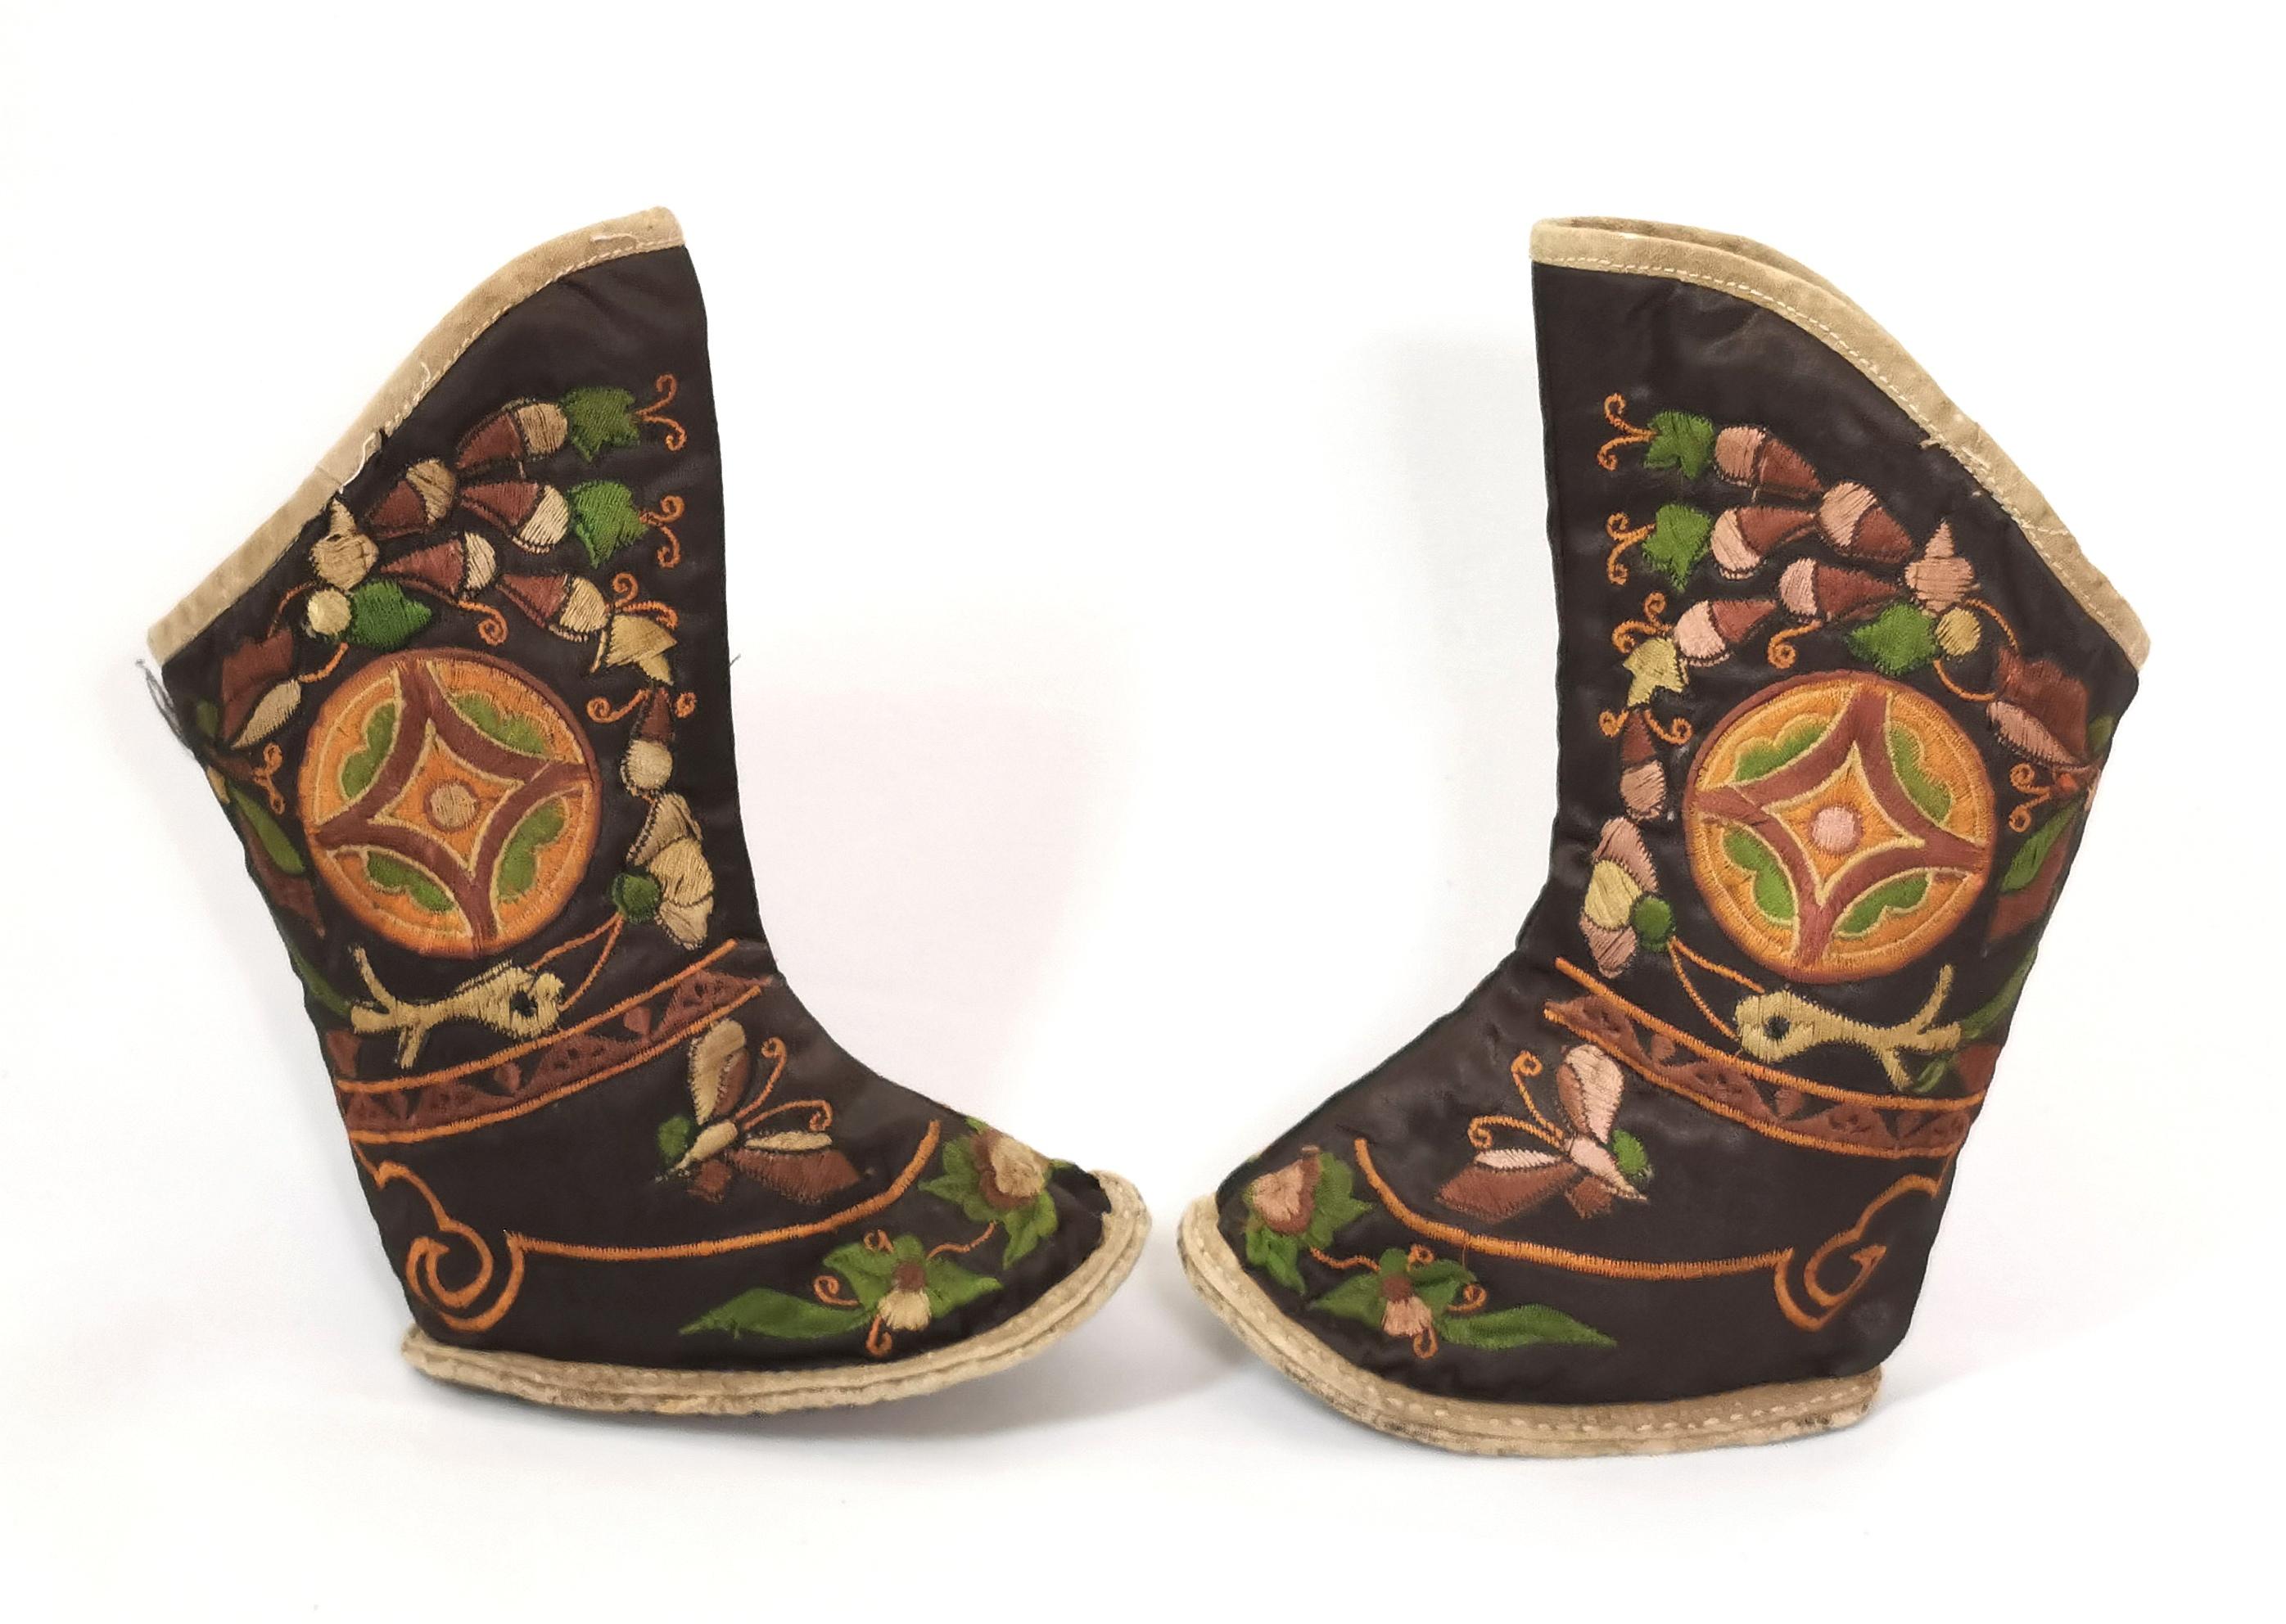 A beautiful pair antique Chinese embroidered silk boots.

They are perfectly designed with hand embroidered foliate and butterflies on a chocolate brown silk ground.

They have reinforced fabric soles and are slightly longer at the front than the